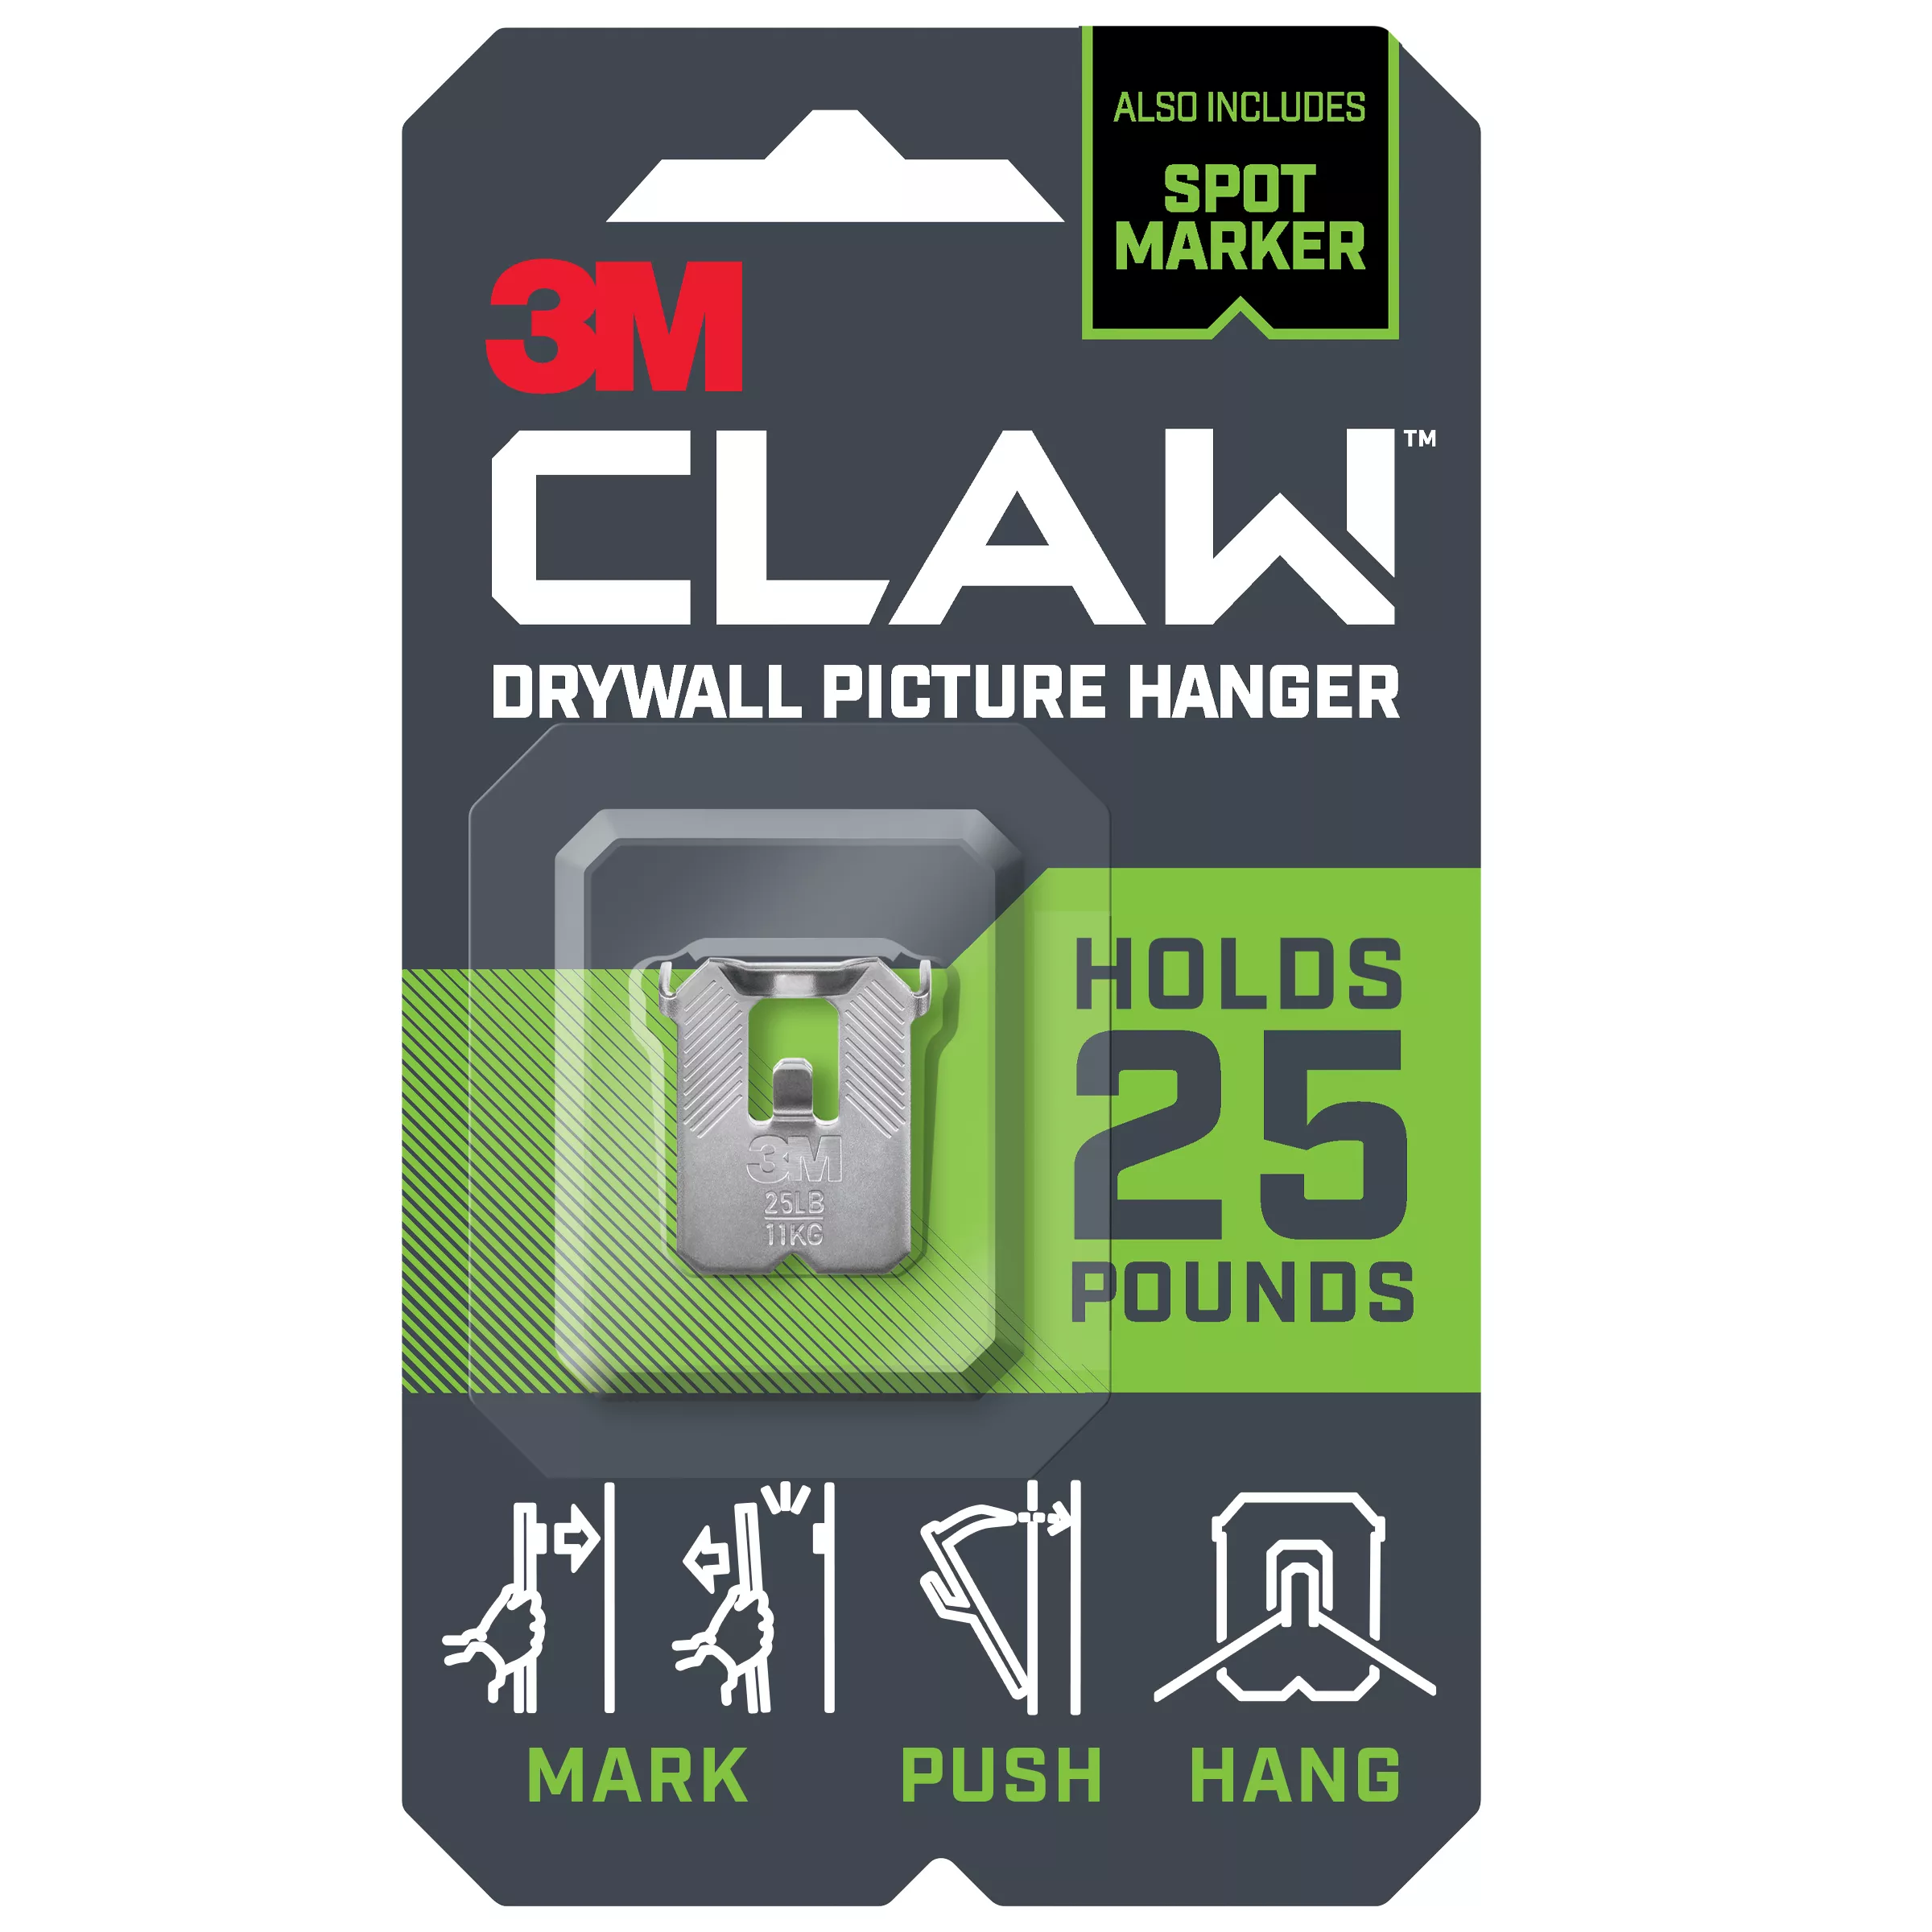 3M CLAW™ Drywall Picture Hanger 25 lb with Temporary Spot Marker 3PH25M-1EF, 1 hanger, 1 marker